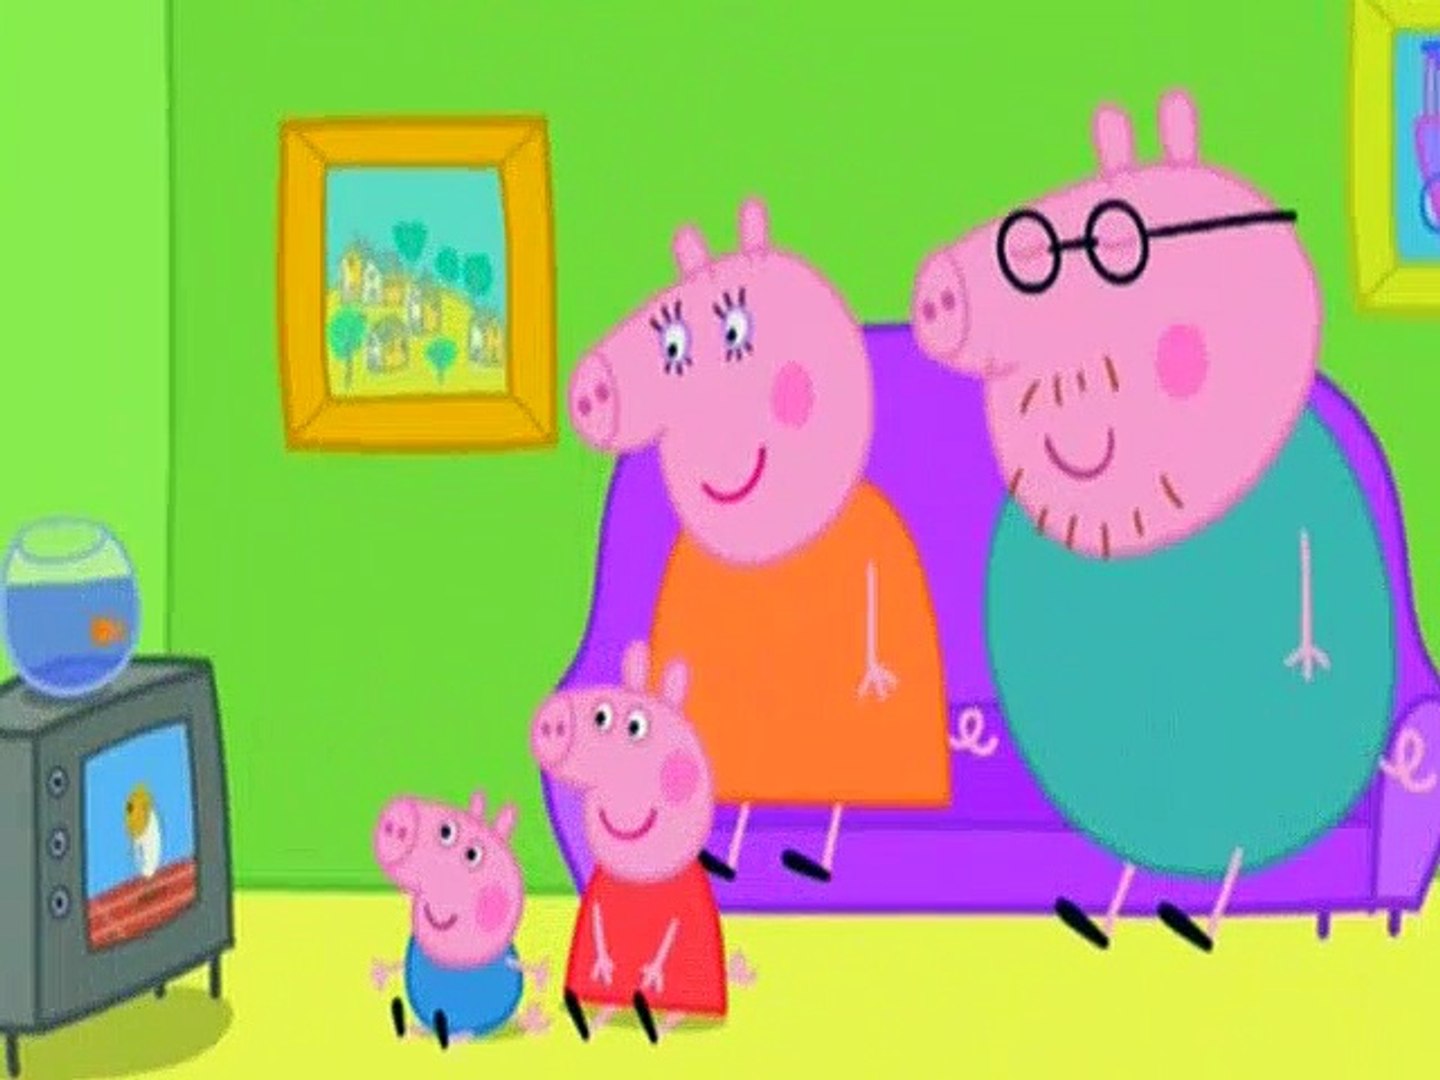 Peppa Pig S03E41 Champion Daddy Pig - video Dailymotion